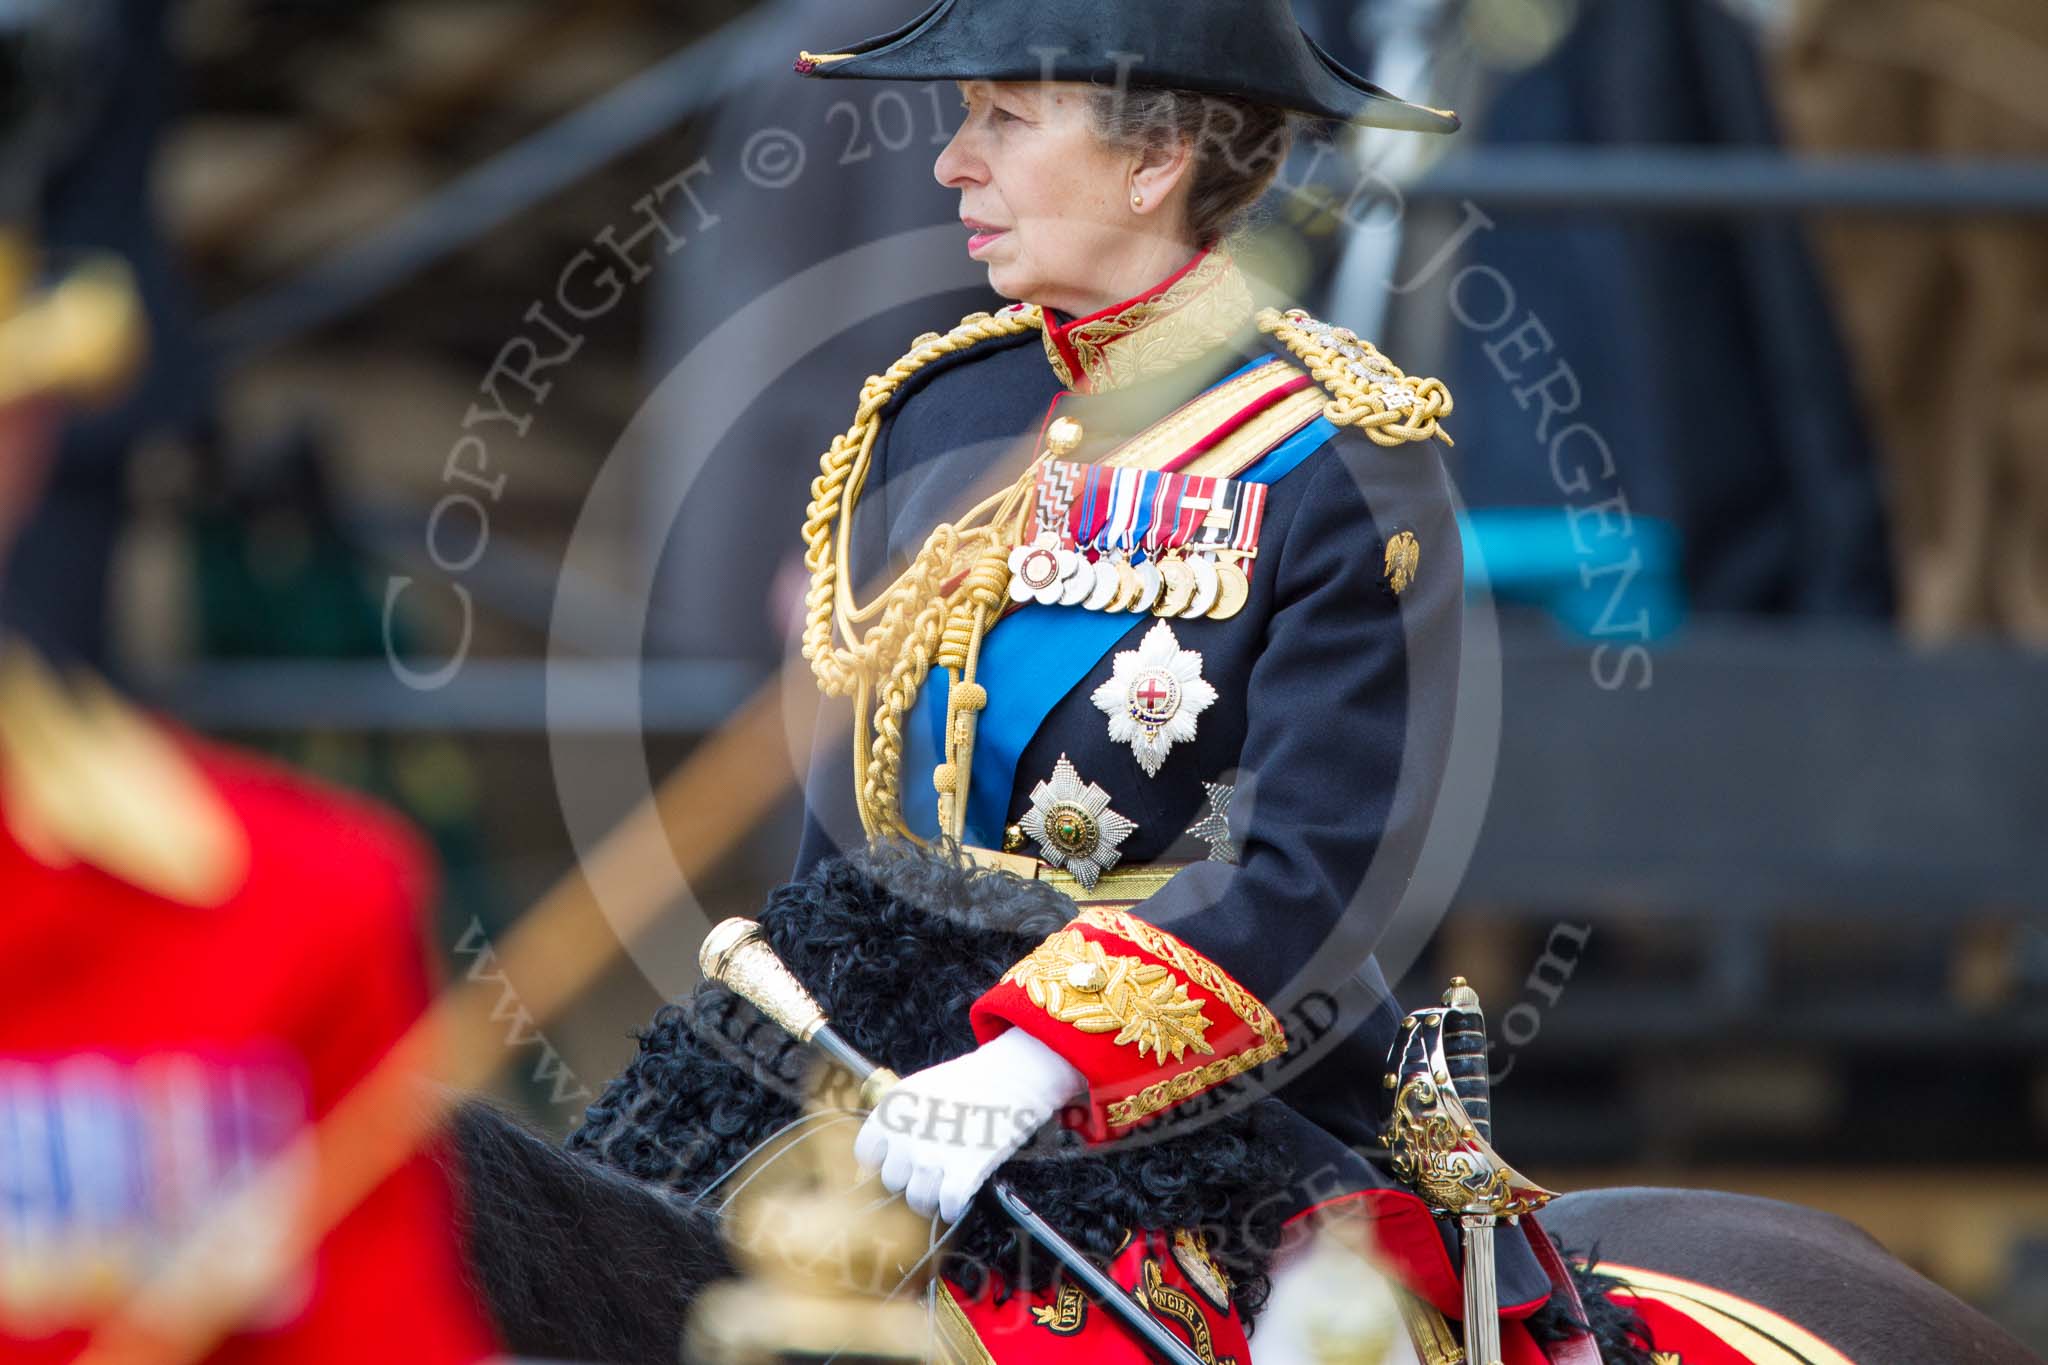 Trooping the Colour 2012: Her Royal Highness The Princess Royal, Gold Stick in Waiting and Colonel The Blues and Royals (Royal Horse Guards and 1st Dragoons)..
Horse Guards Parade, Westminster,
London SW1,

United Kingdom,
on 16 June 2012 at 11:01, image #185